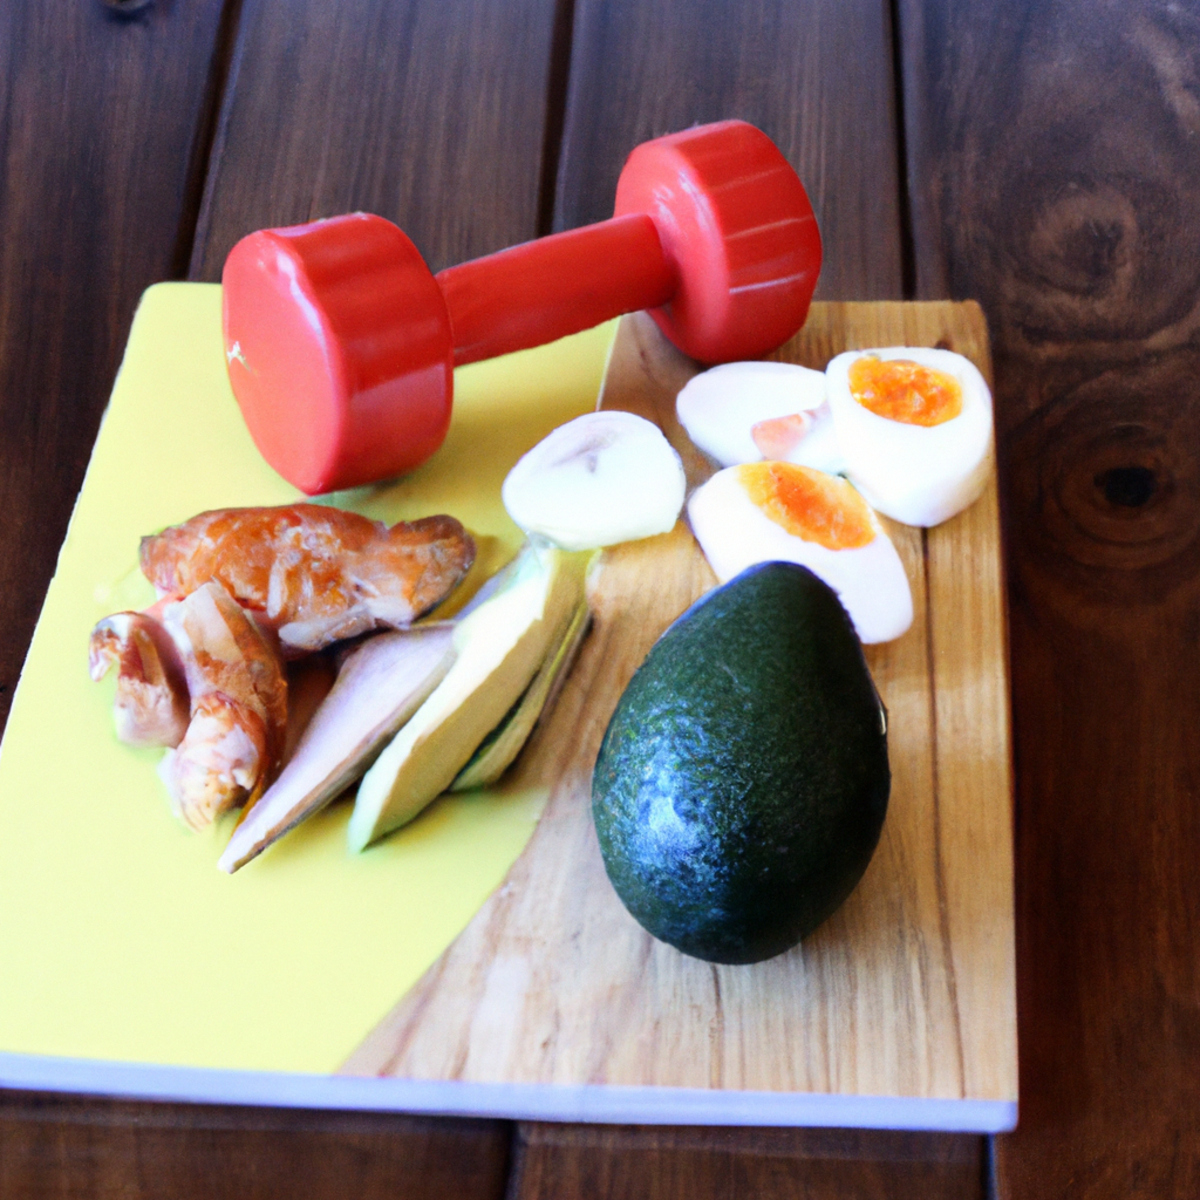 The photo shows a wooden cutting board with various healthy foods arranged on it, including sliced avocado, cherry tomatoes, grilled chicken breast, and a hard-boiled egg. In the background, there is a yoga mat and a set of dumbbells, suggesting that exercise is an important part of the keto diet plan. The lighting is bright and natural, highlighting the vibrant colors of the food and creating a warm and inviting atmosphere. Overall, the photo conveys a sense of balance and wellness, encouraging readers to adopt a healthy lifestyle that combines nutritious eating with regular physical activity.